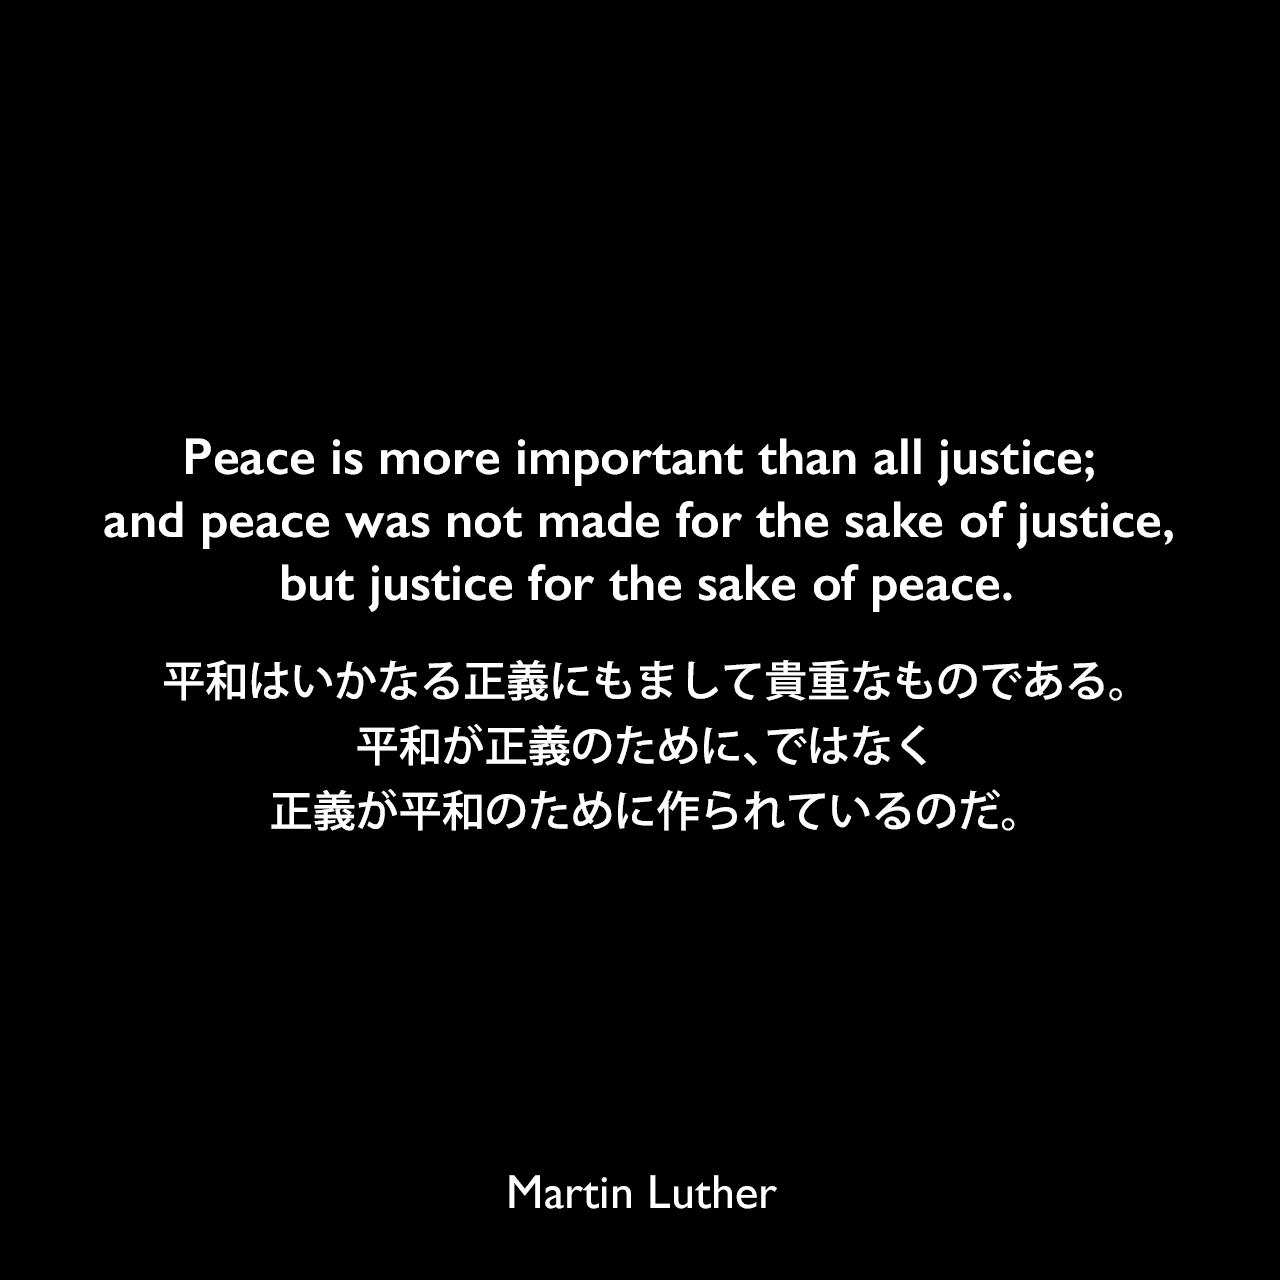 Peace is more important than all justice; and peace was not made for the sake of justice, but justice for the sake of peace.平和はいかなる正義にもまして貴重なものである。平和が正義のために、ではなく、正義が平和のために作られているのだ。- 1530年の結婚にてMartin Luther